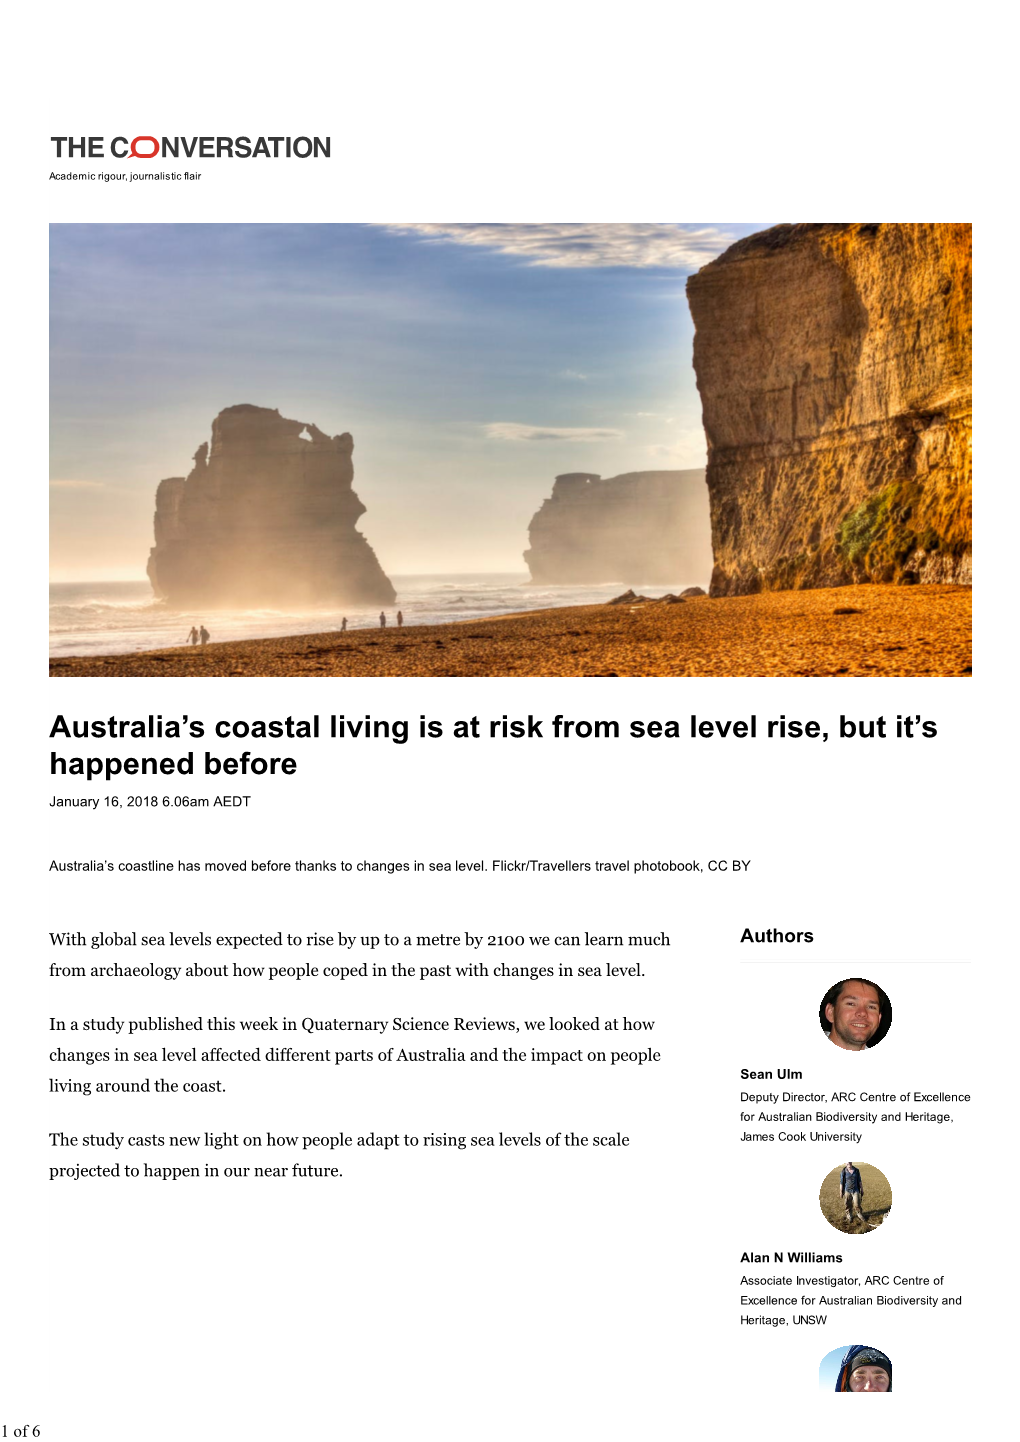 Australia's Coastal Living Is at Risk from Sea Level Rise, but It's Happened